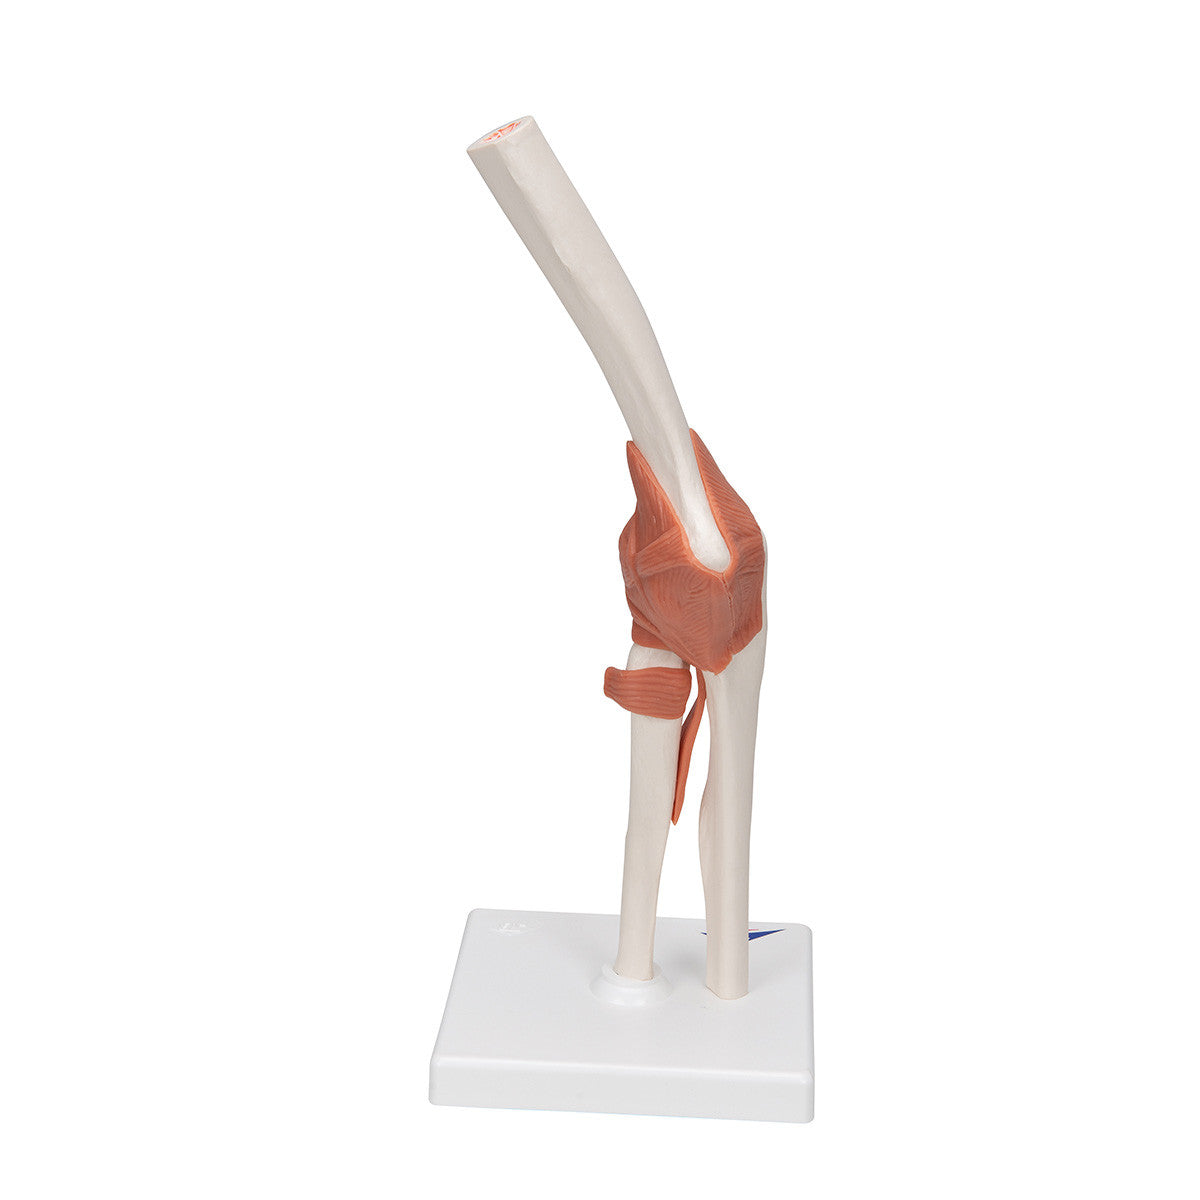 a83_04_1200_1200_functional-human-elbow-joint-model-with-ligaments-3b-smart-anatomy__39832.1589753045.1280.1280.jpg